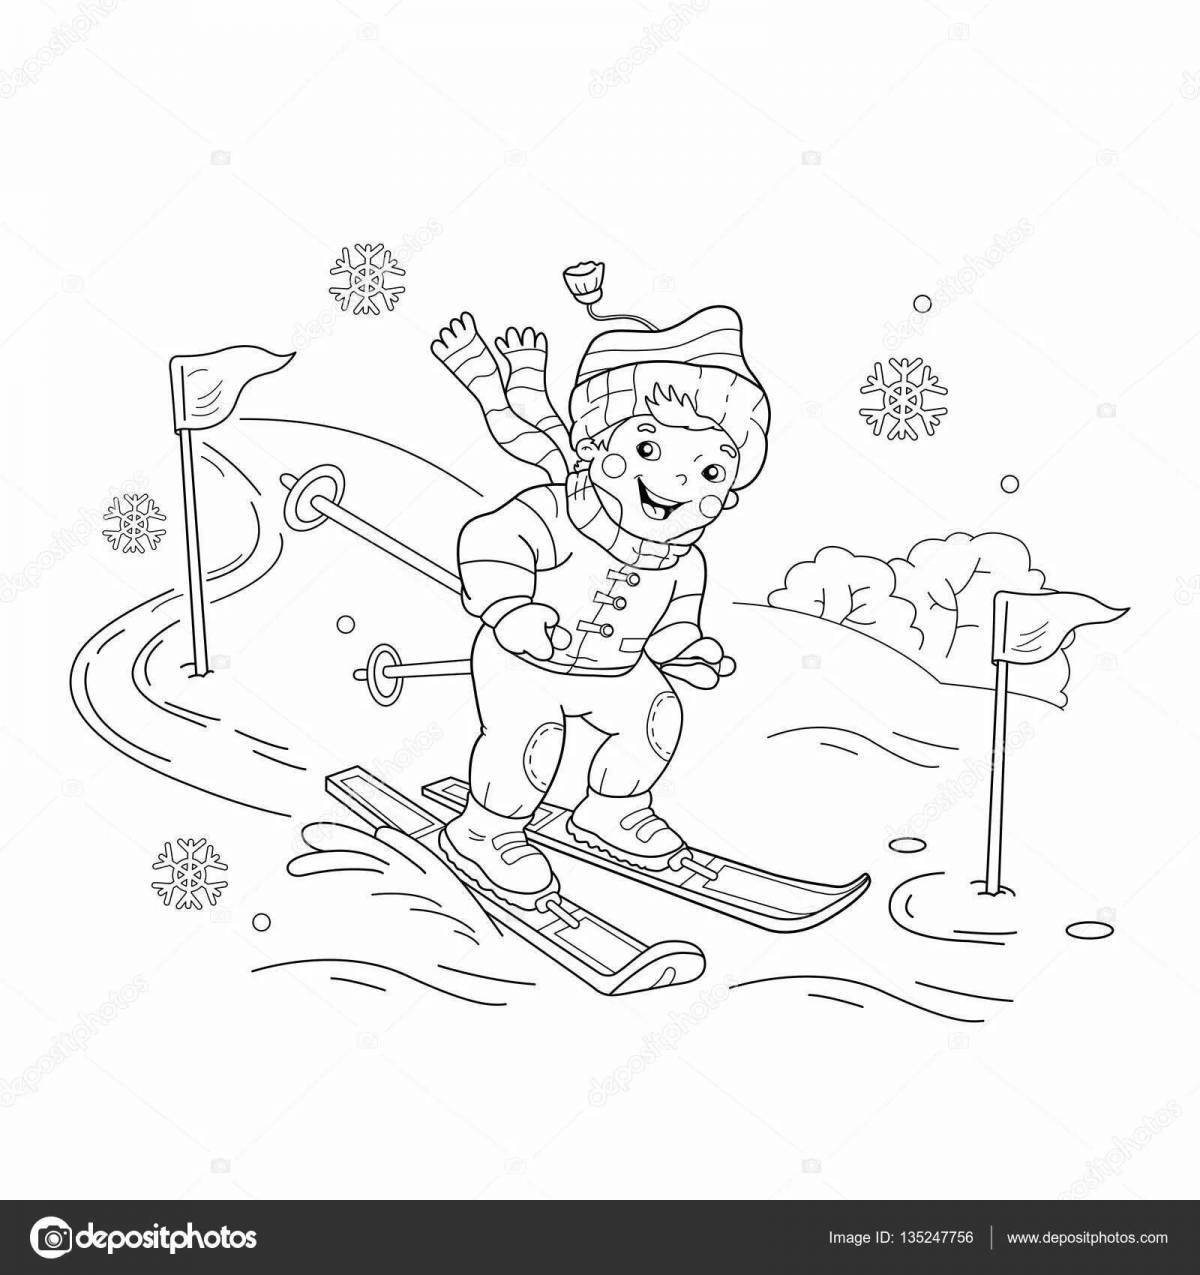 Fantastic coloring book winter sports for children 6-7 years old